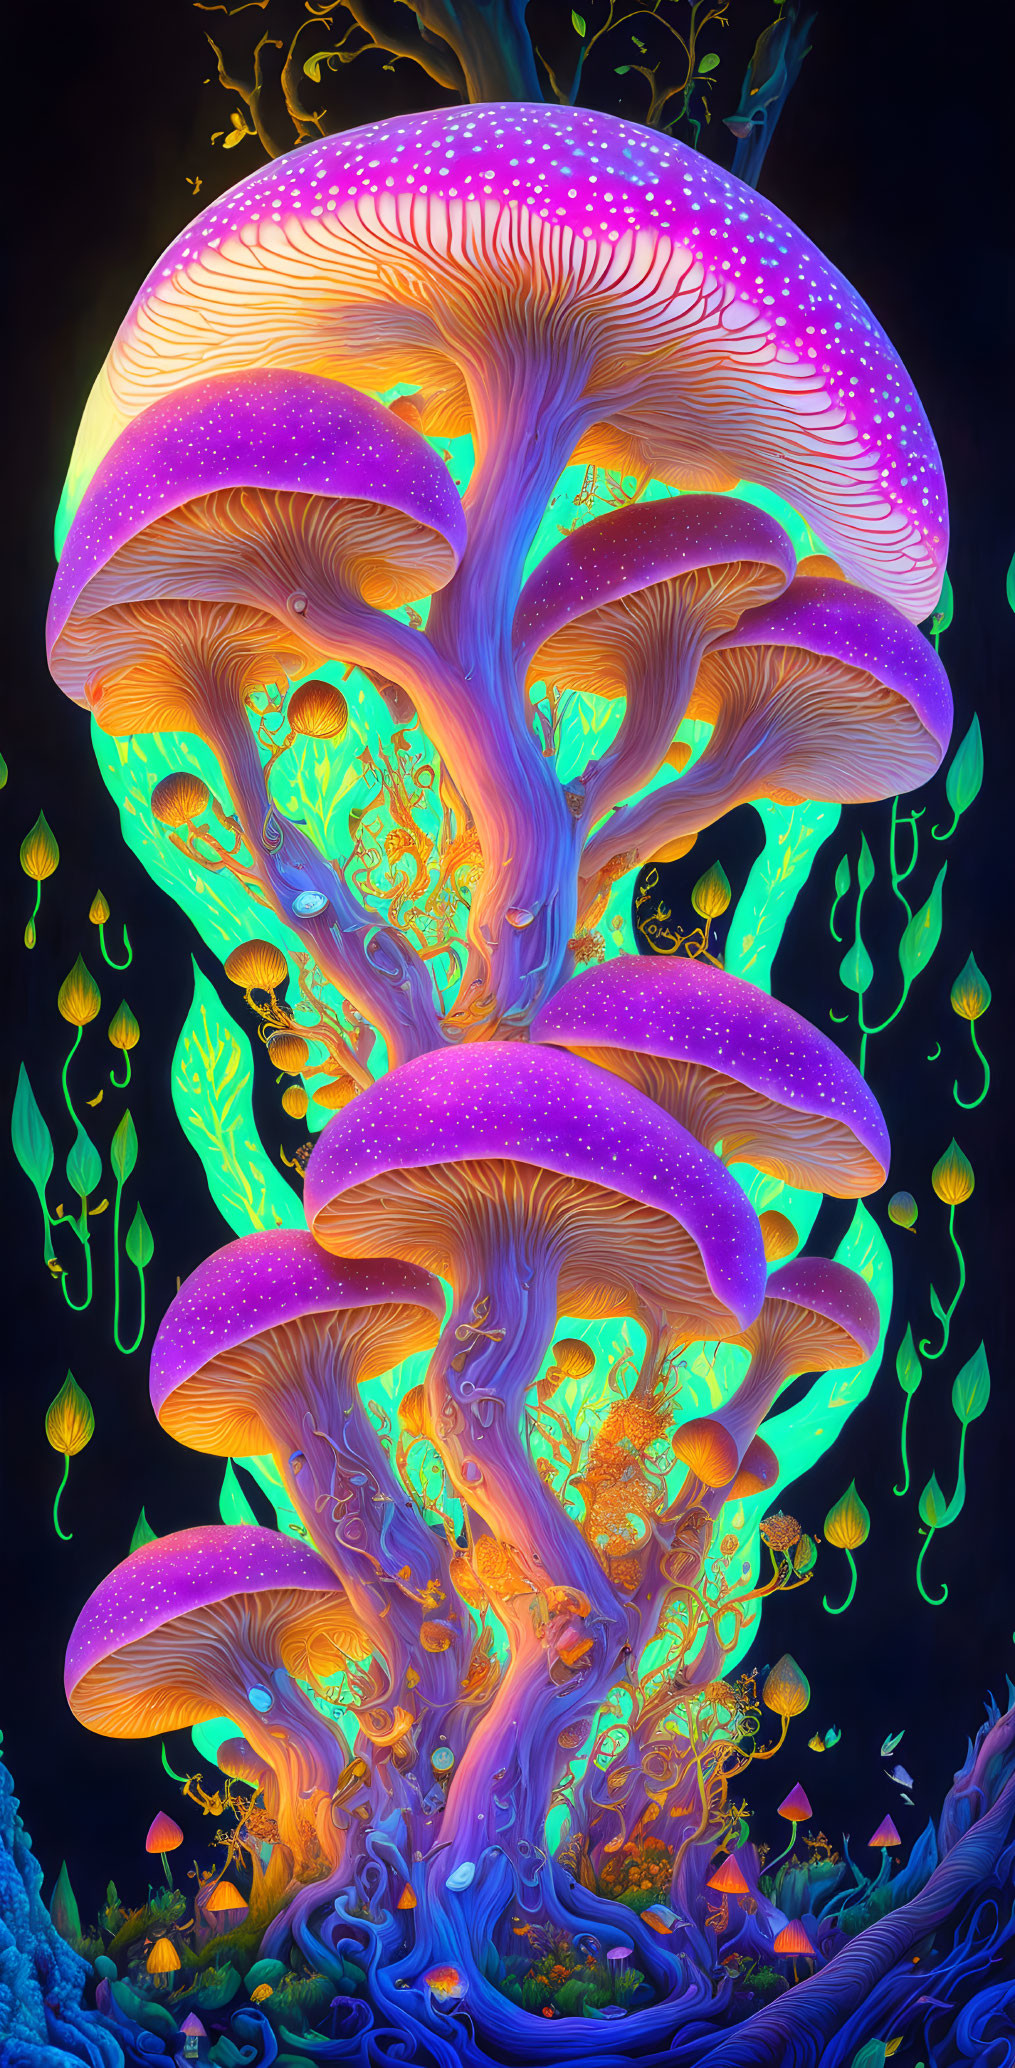 Colorful tree-shaped jellyfish illustration on dark background with glowing tiers and symbols